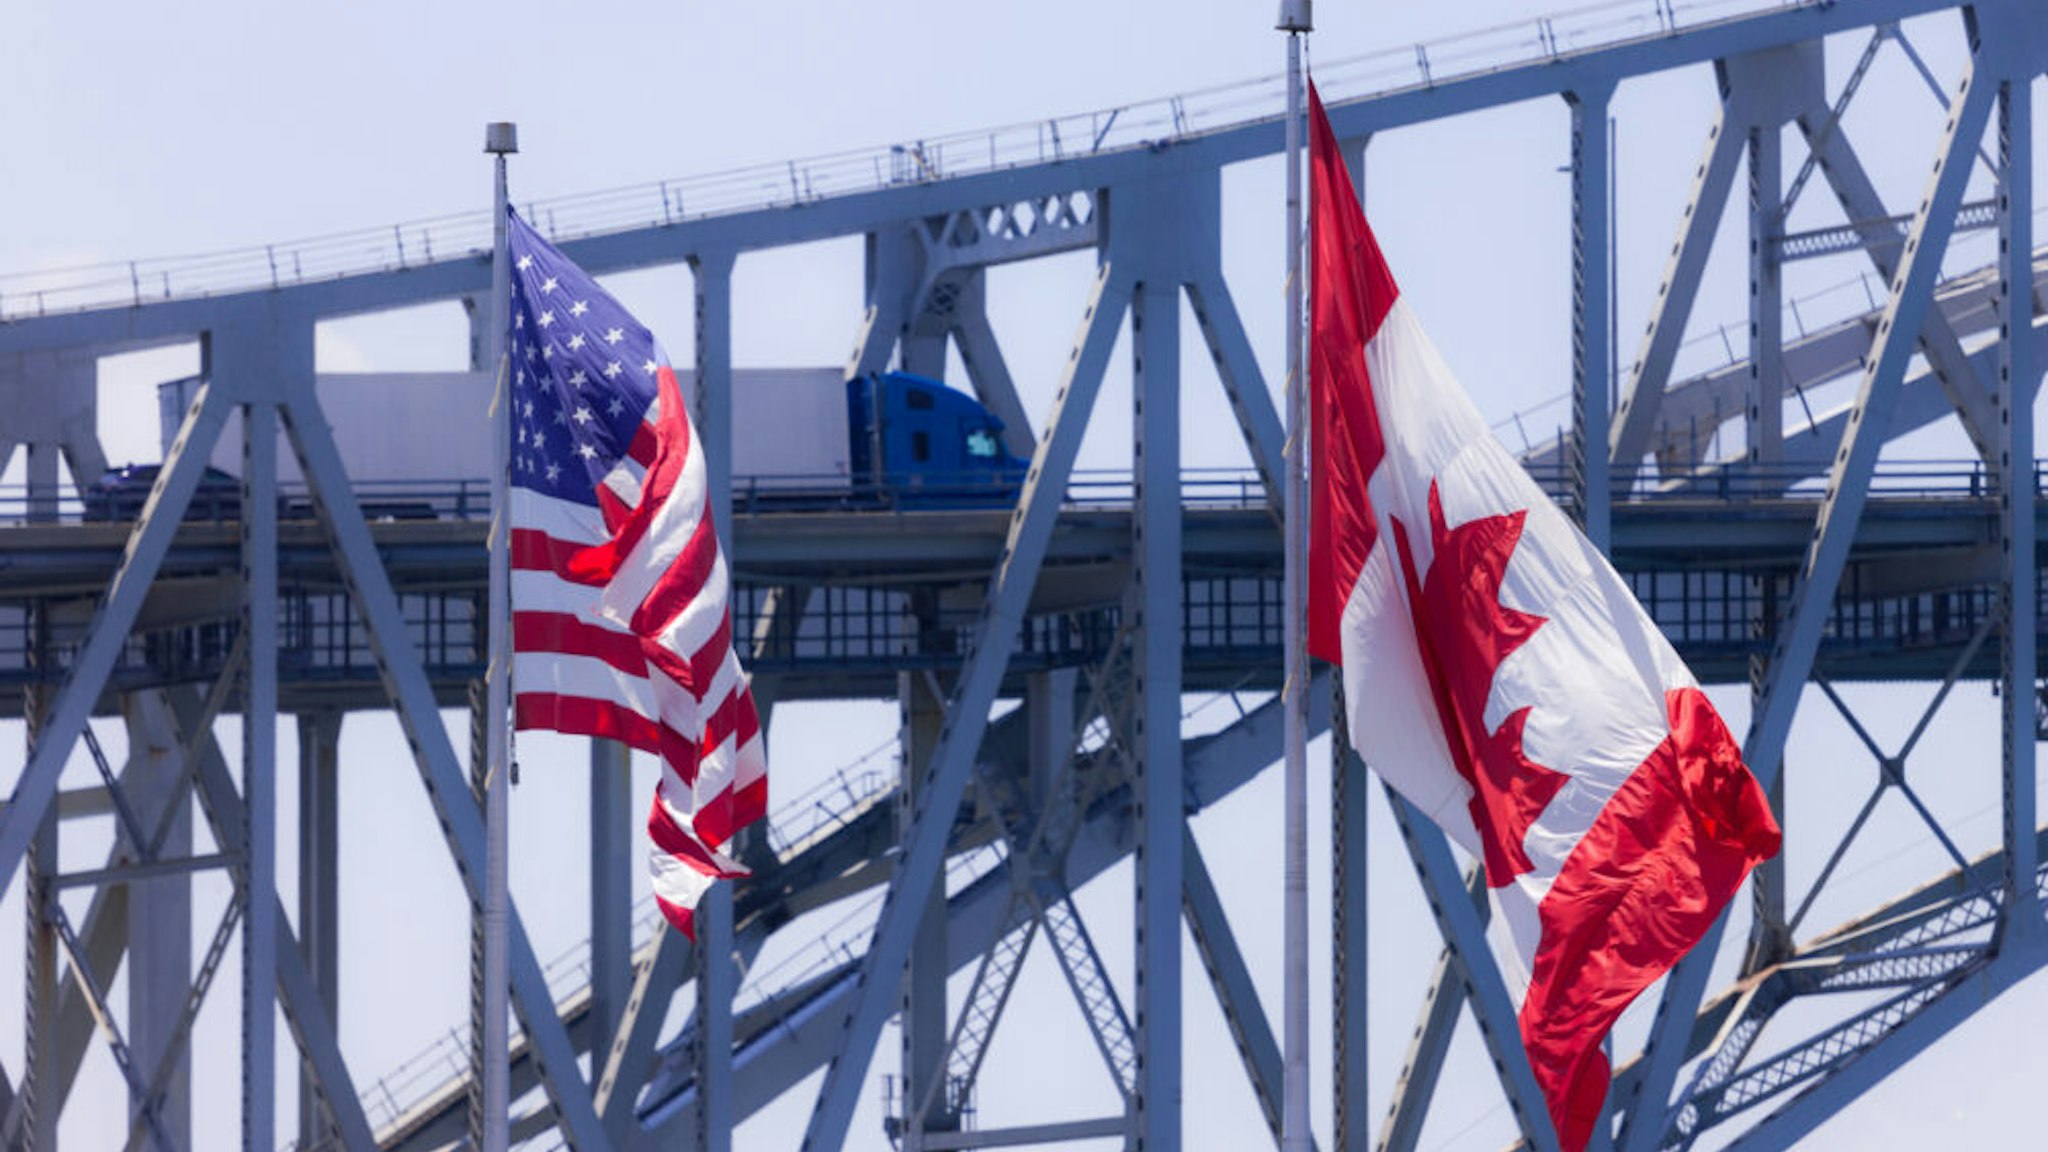 Sarnia, Canada - June 11, 2017. Trucks and cars make their way across the Blue Water Bridge in Sarnia Canada. Opened in 1938 the bridge connects Canada to the United States.